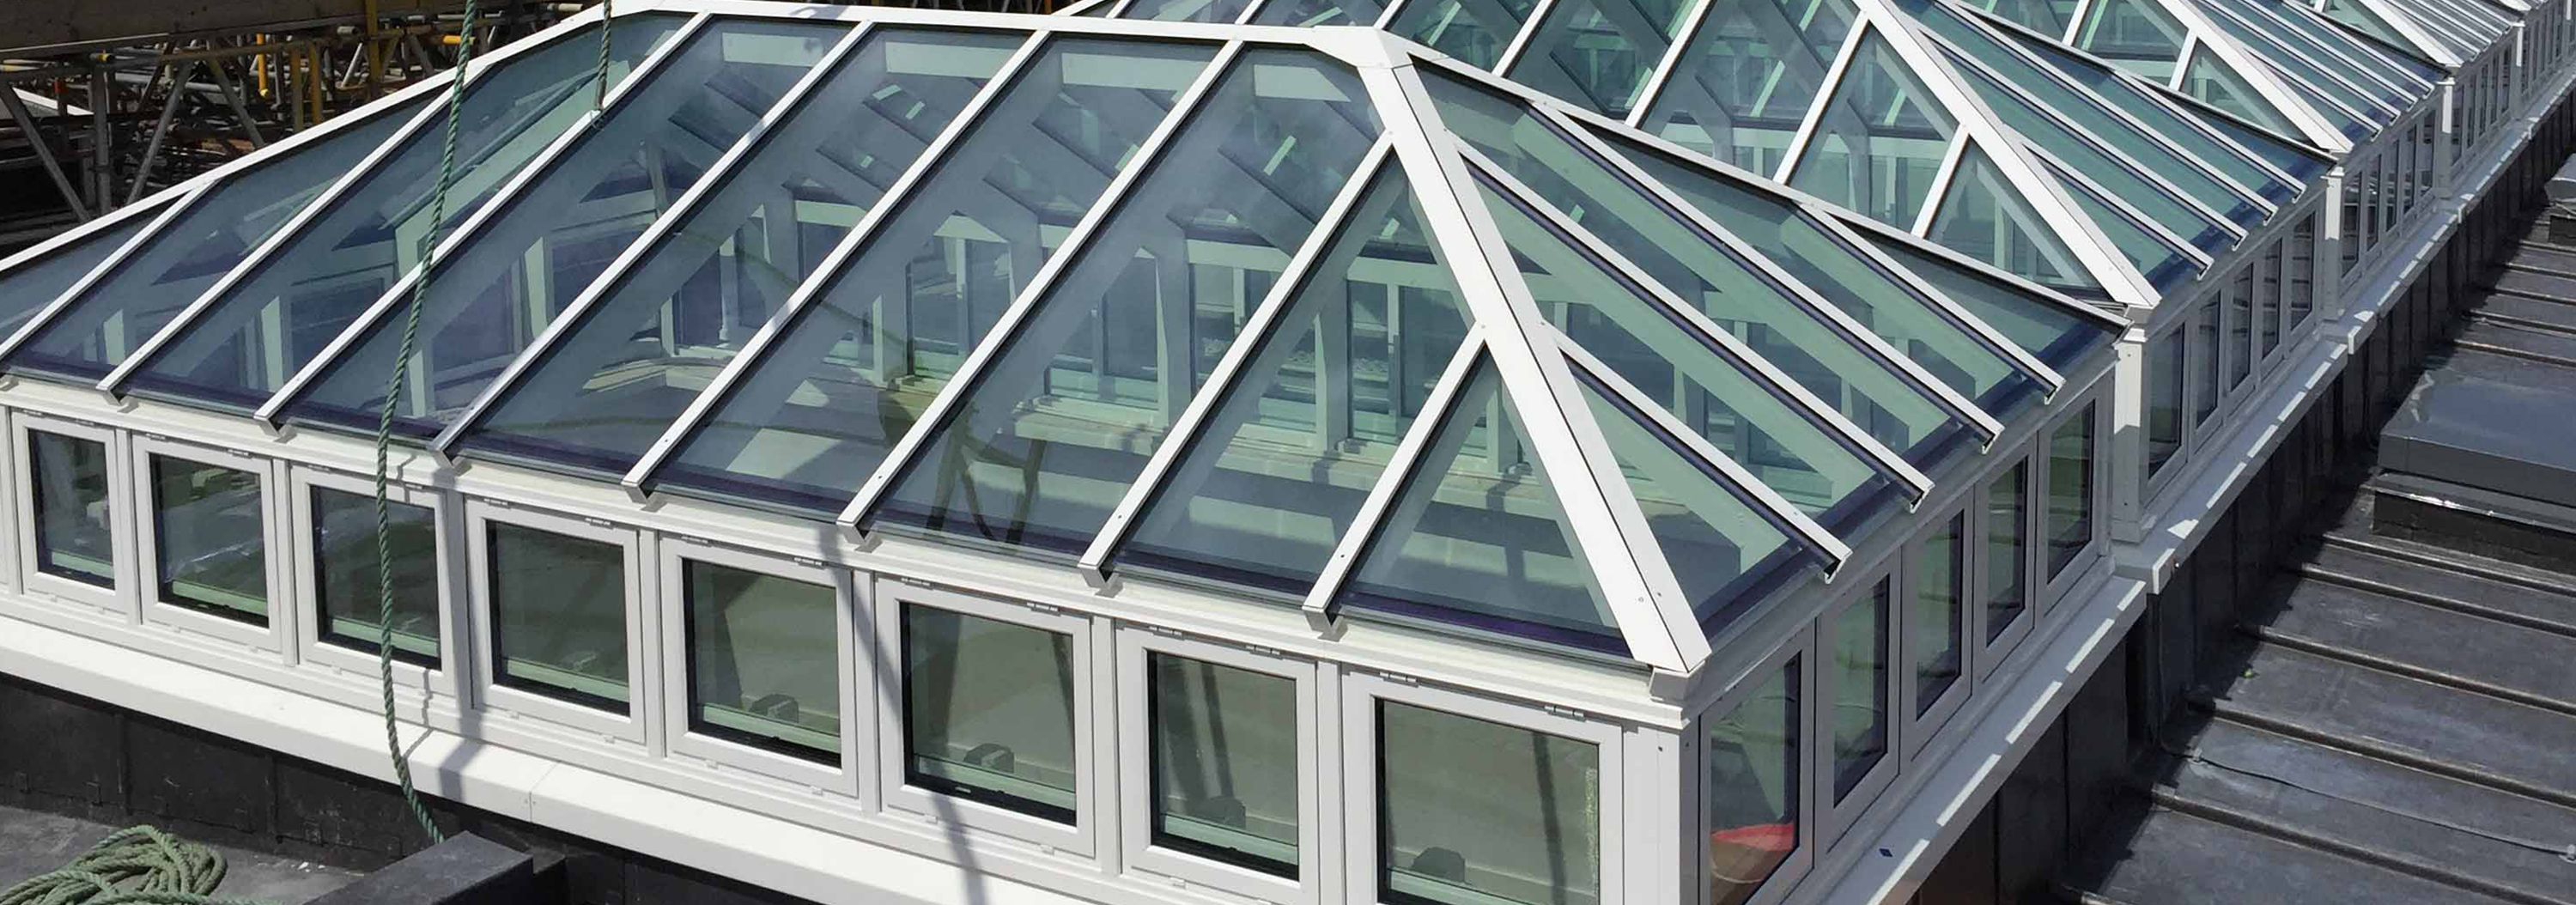 Commercial Roof Lanterns